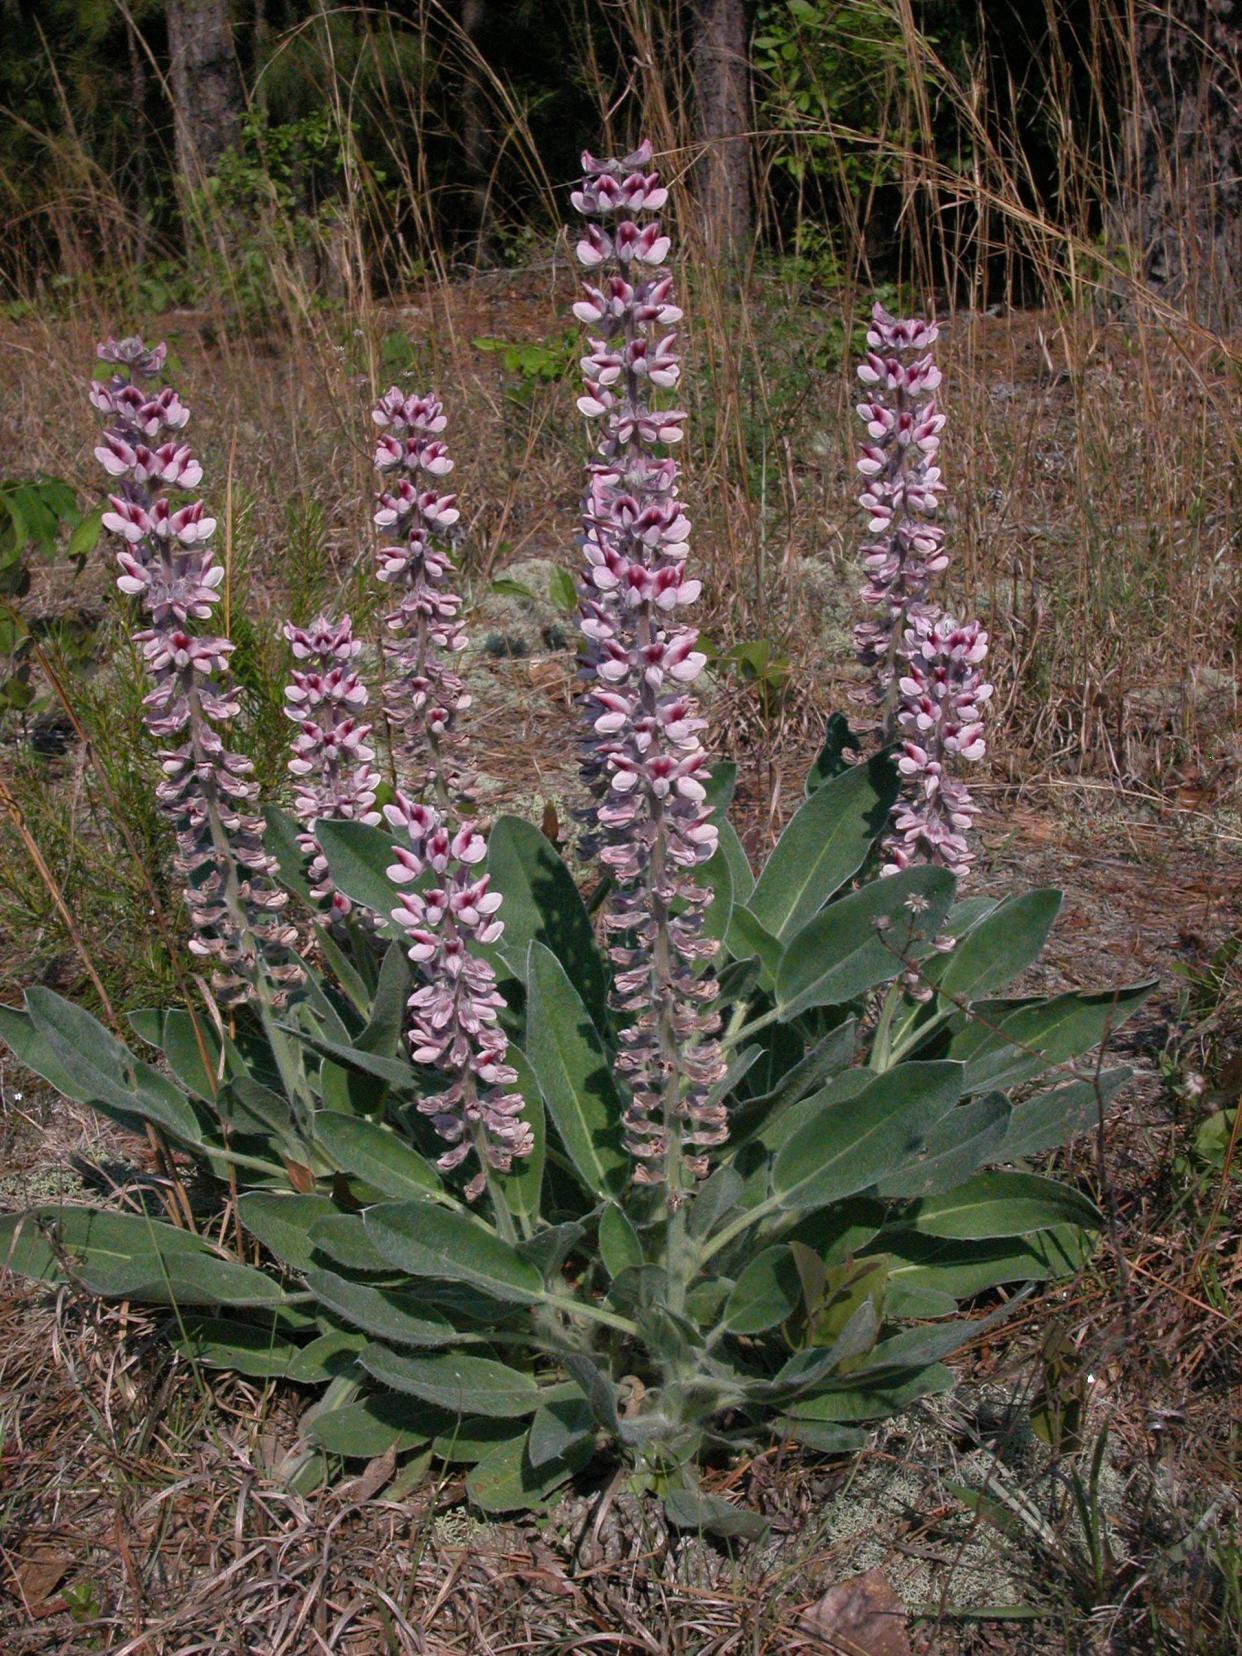 Lady lupine is a gorgeous herb with over 200 fairly close relatives, all close enough to be placed in the same genus.